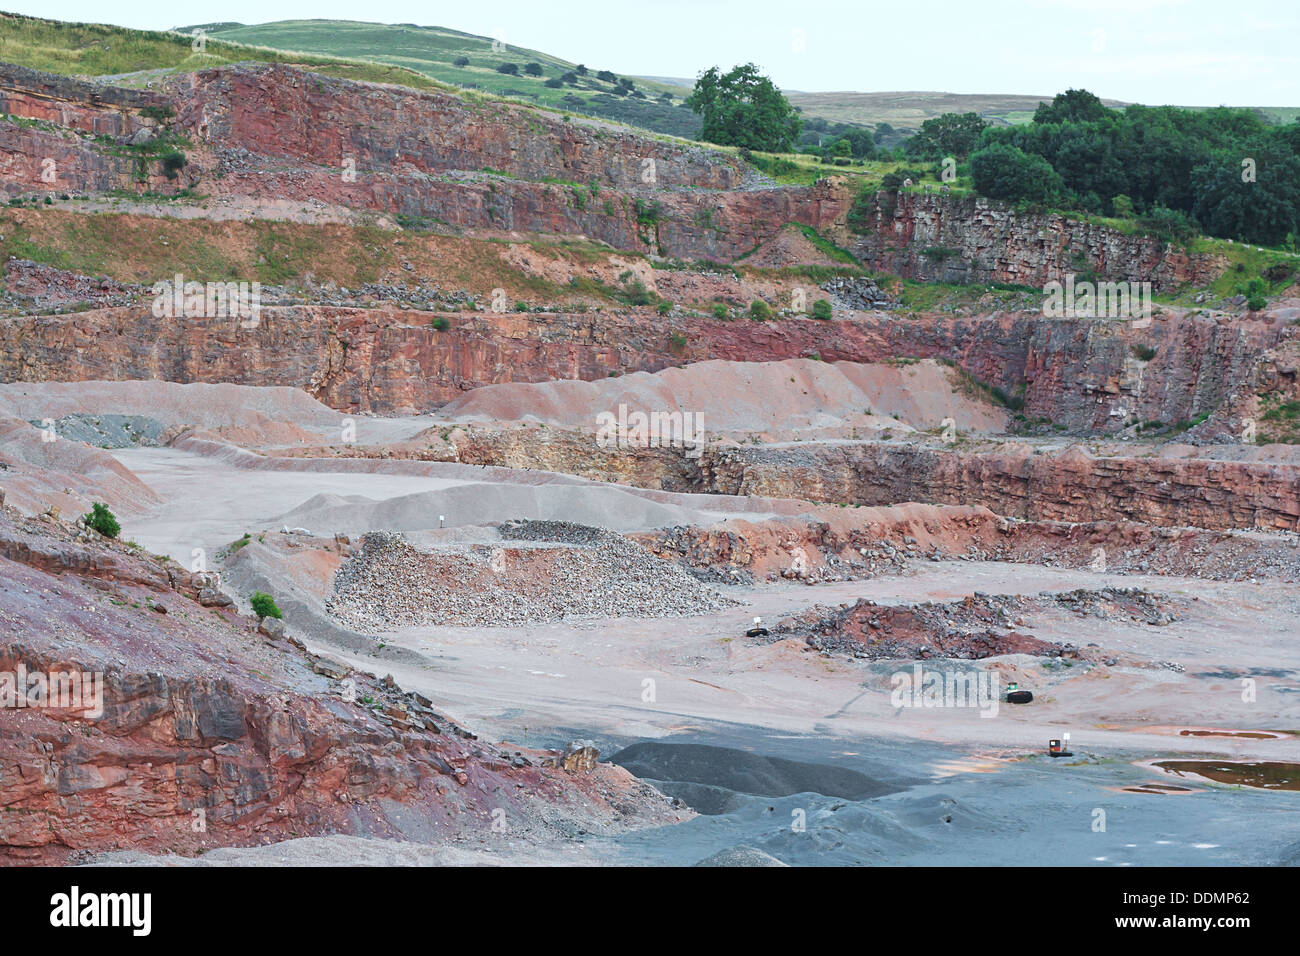 general shot of the inside of a sandstone quarry showing the rock face and levels of excavation Stock Photo